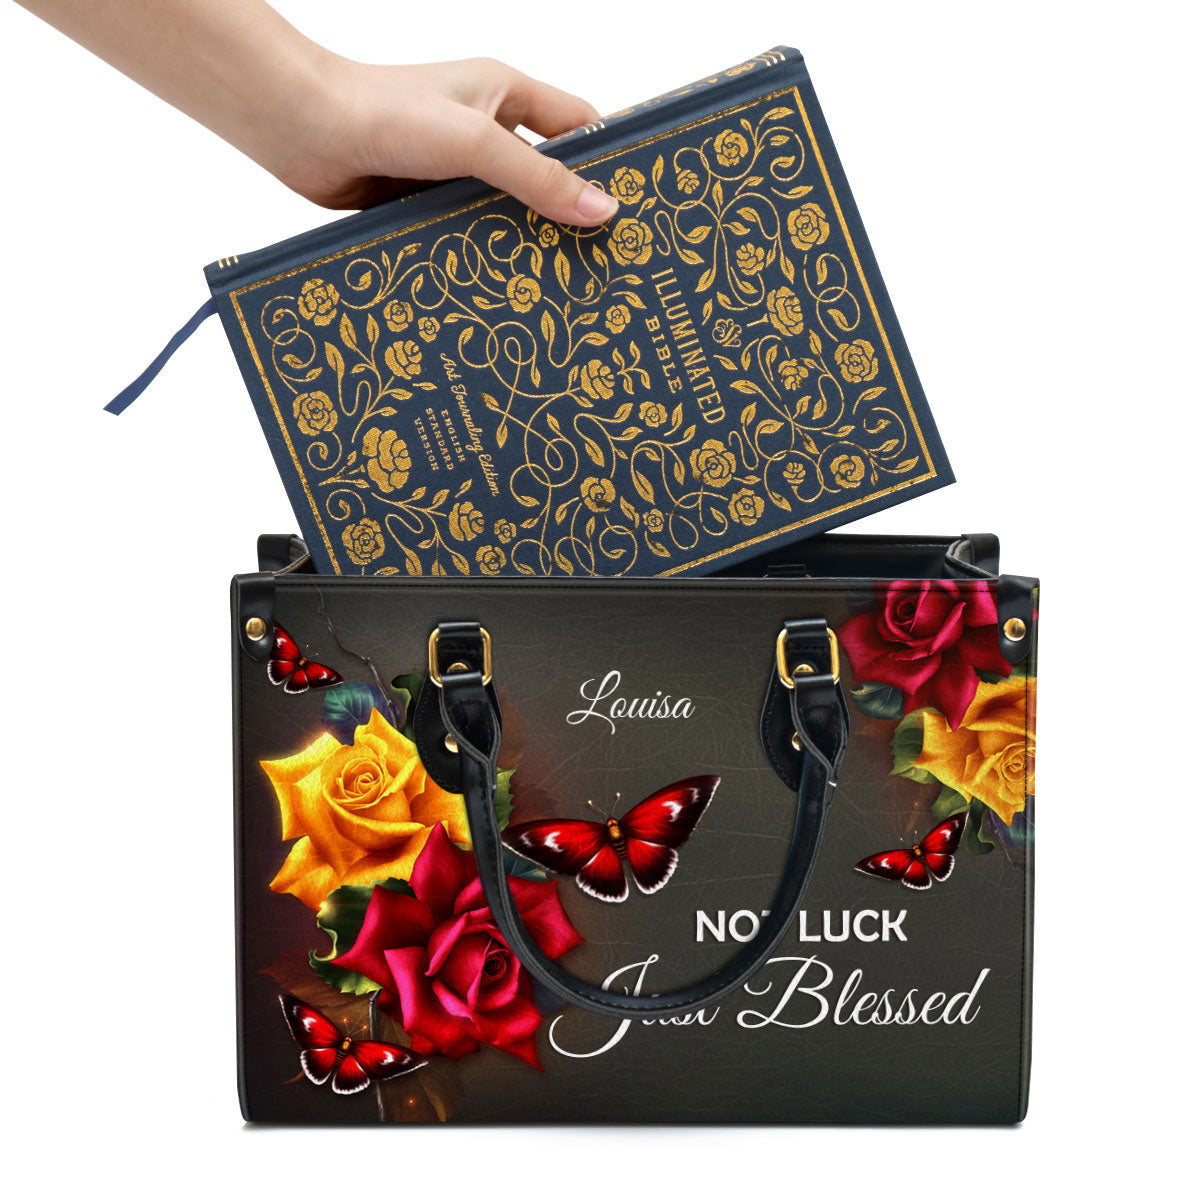 Not Luck Just Blessed Personalized Rose Leather Bag For Women, Religious Gifts For Women